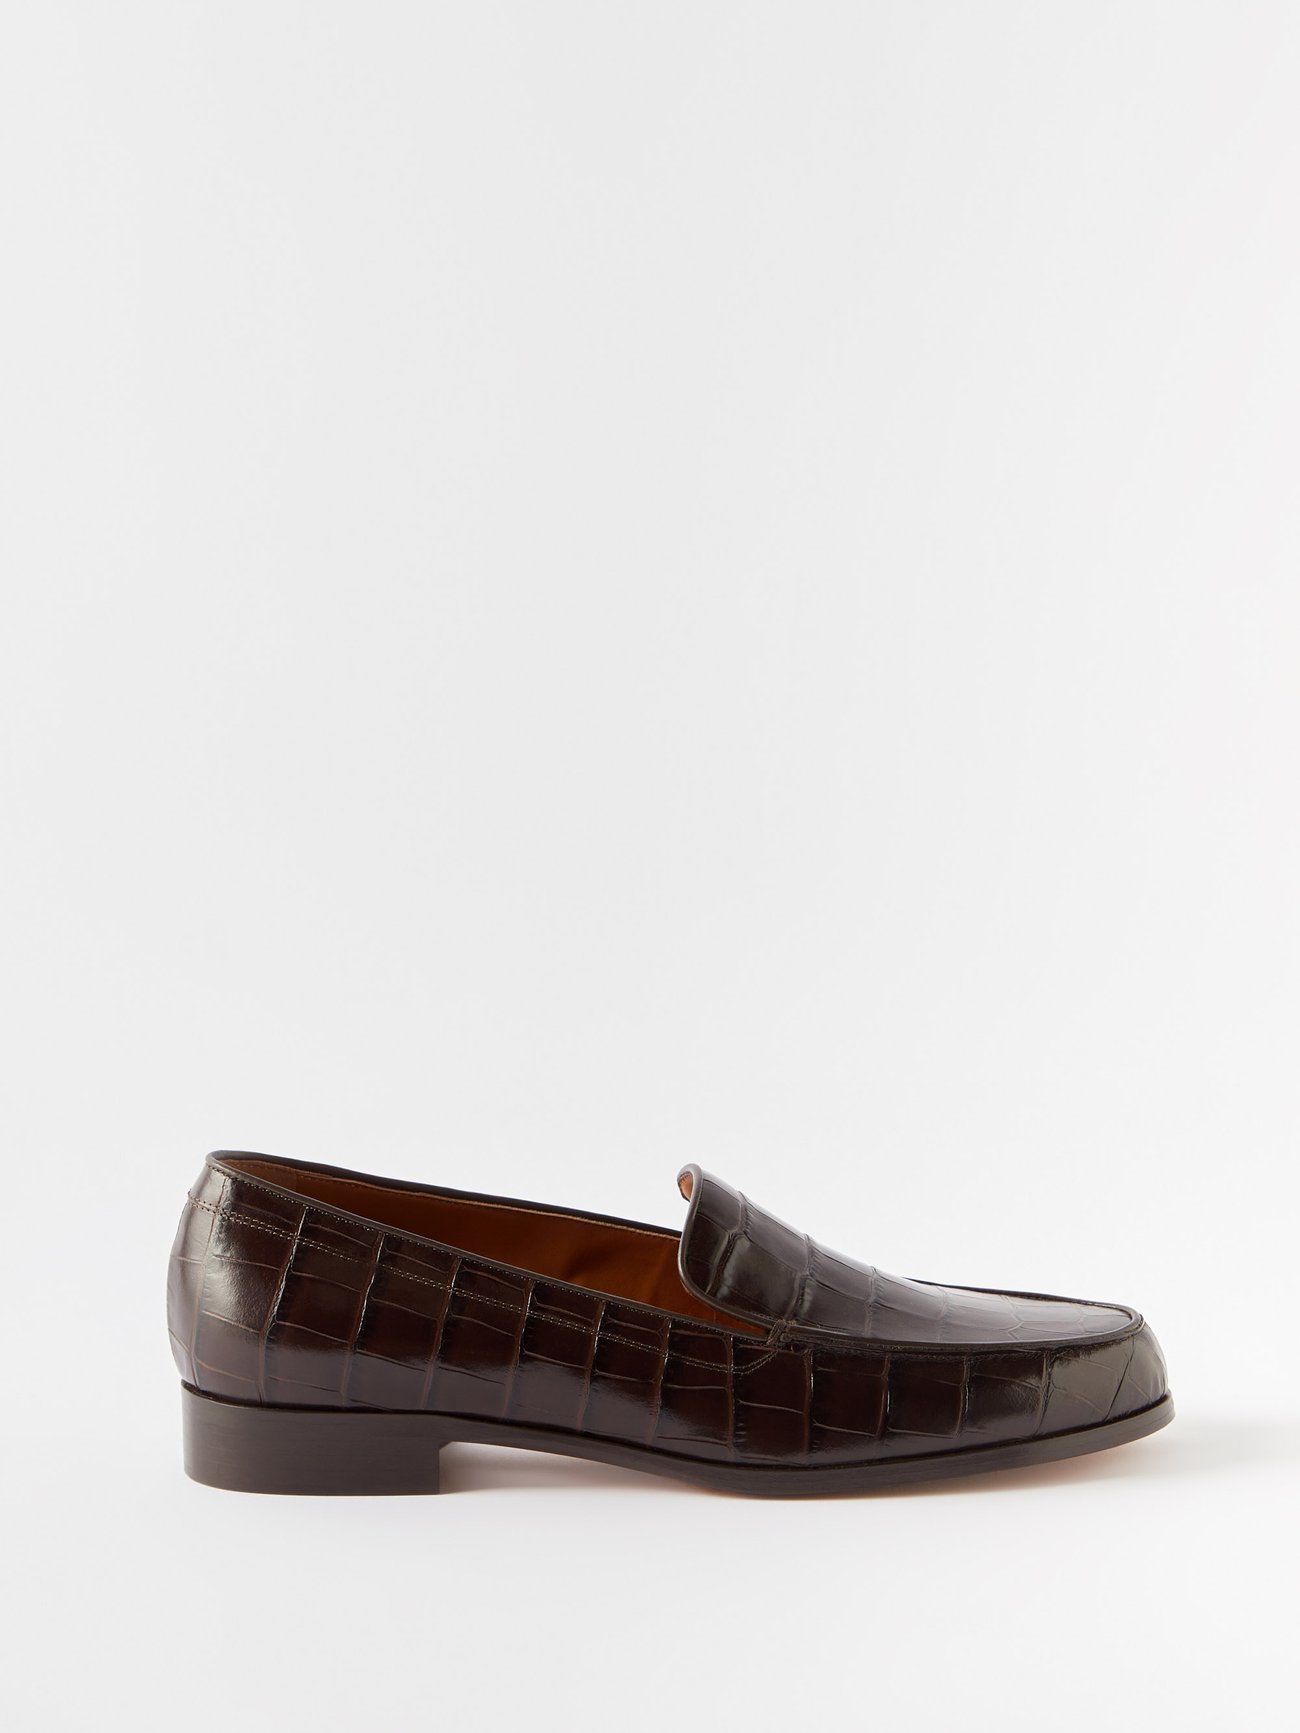 Danielle Croc-Effect Leather Loafers